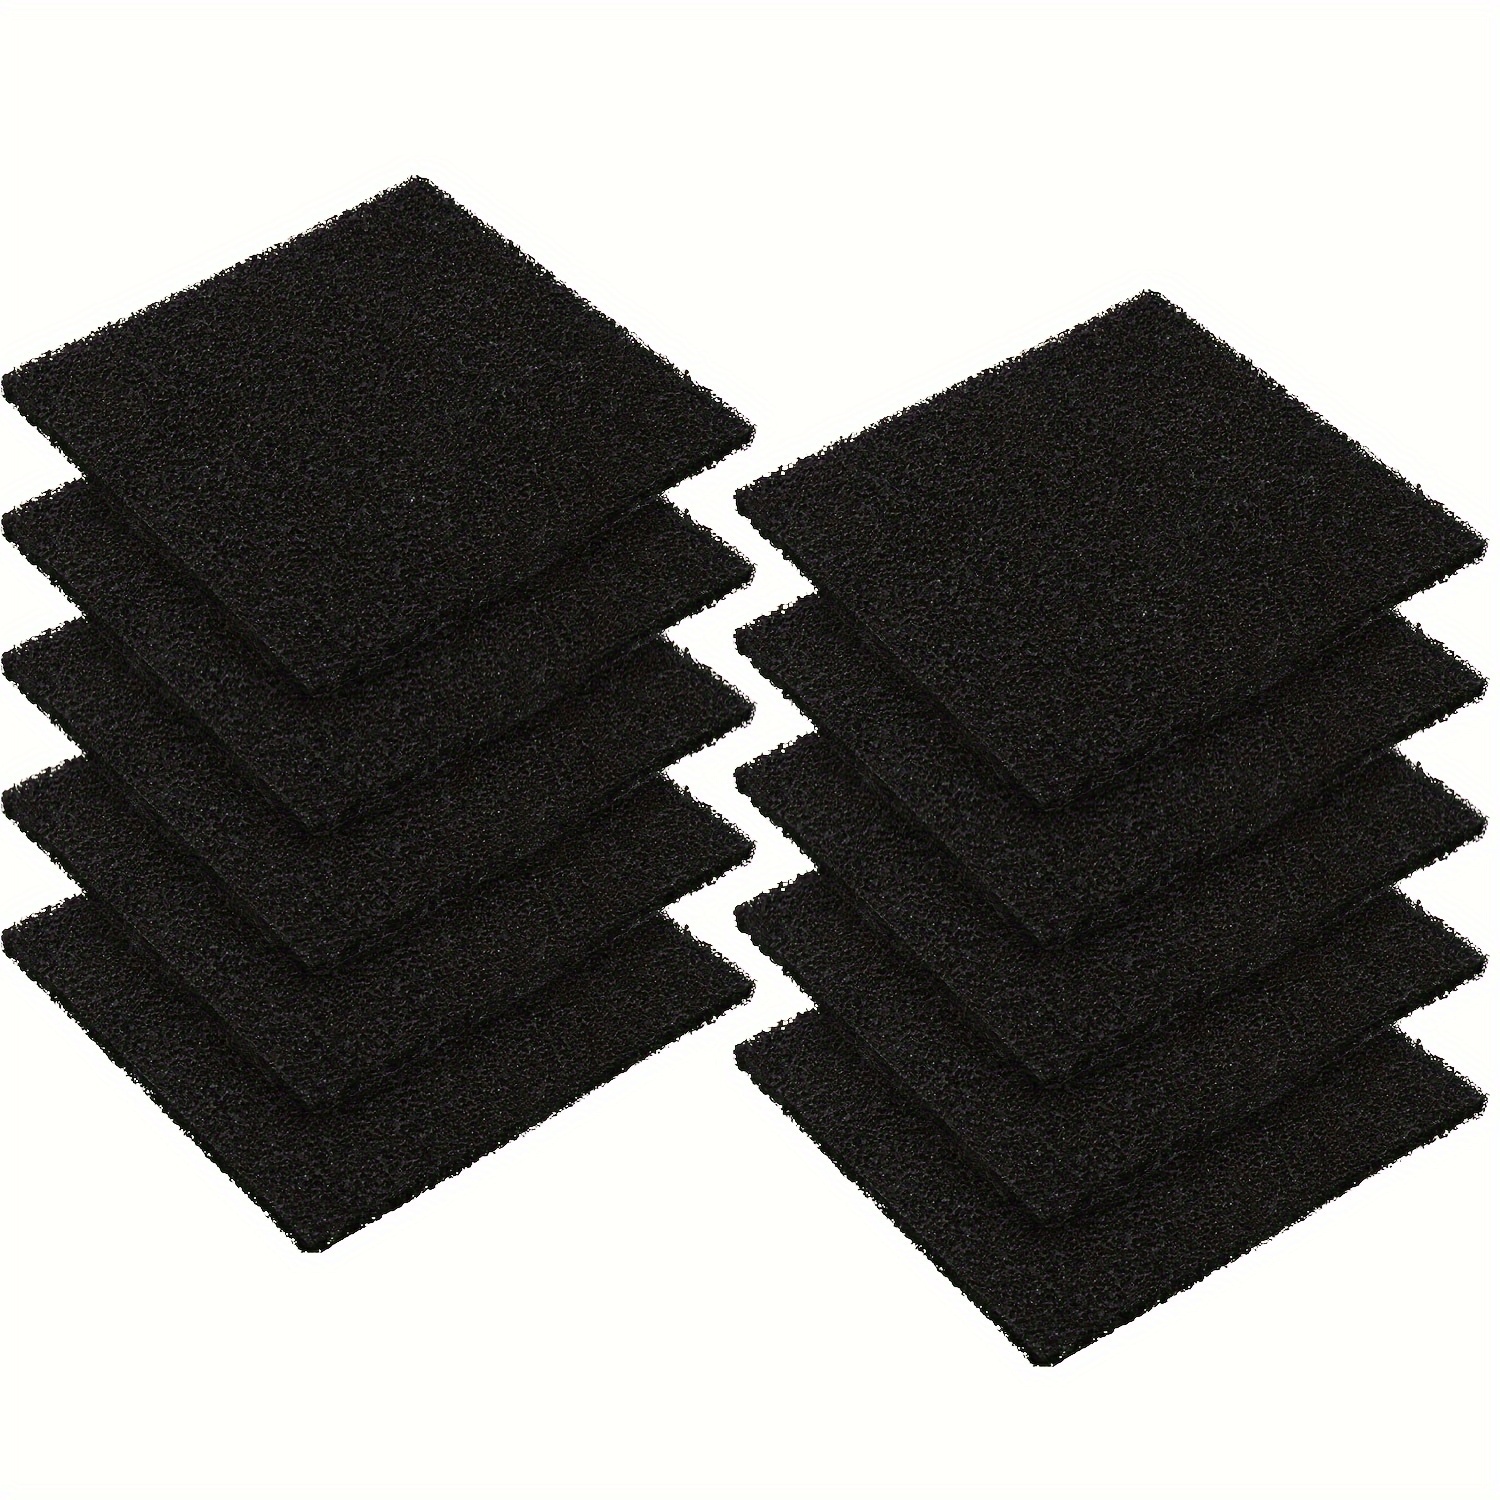 12pcs Kitchen Compost Bin Filter Charcoal Filter Replacement for Countertop